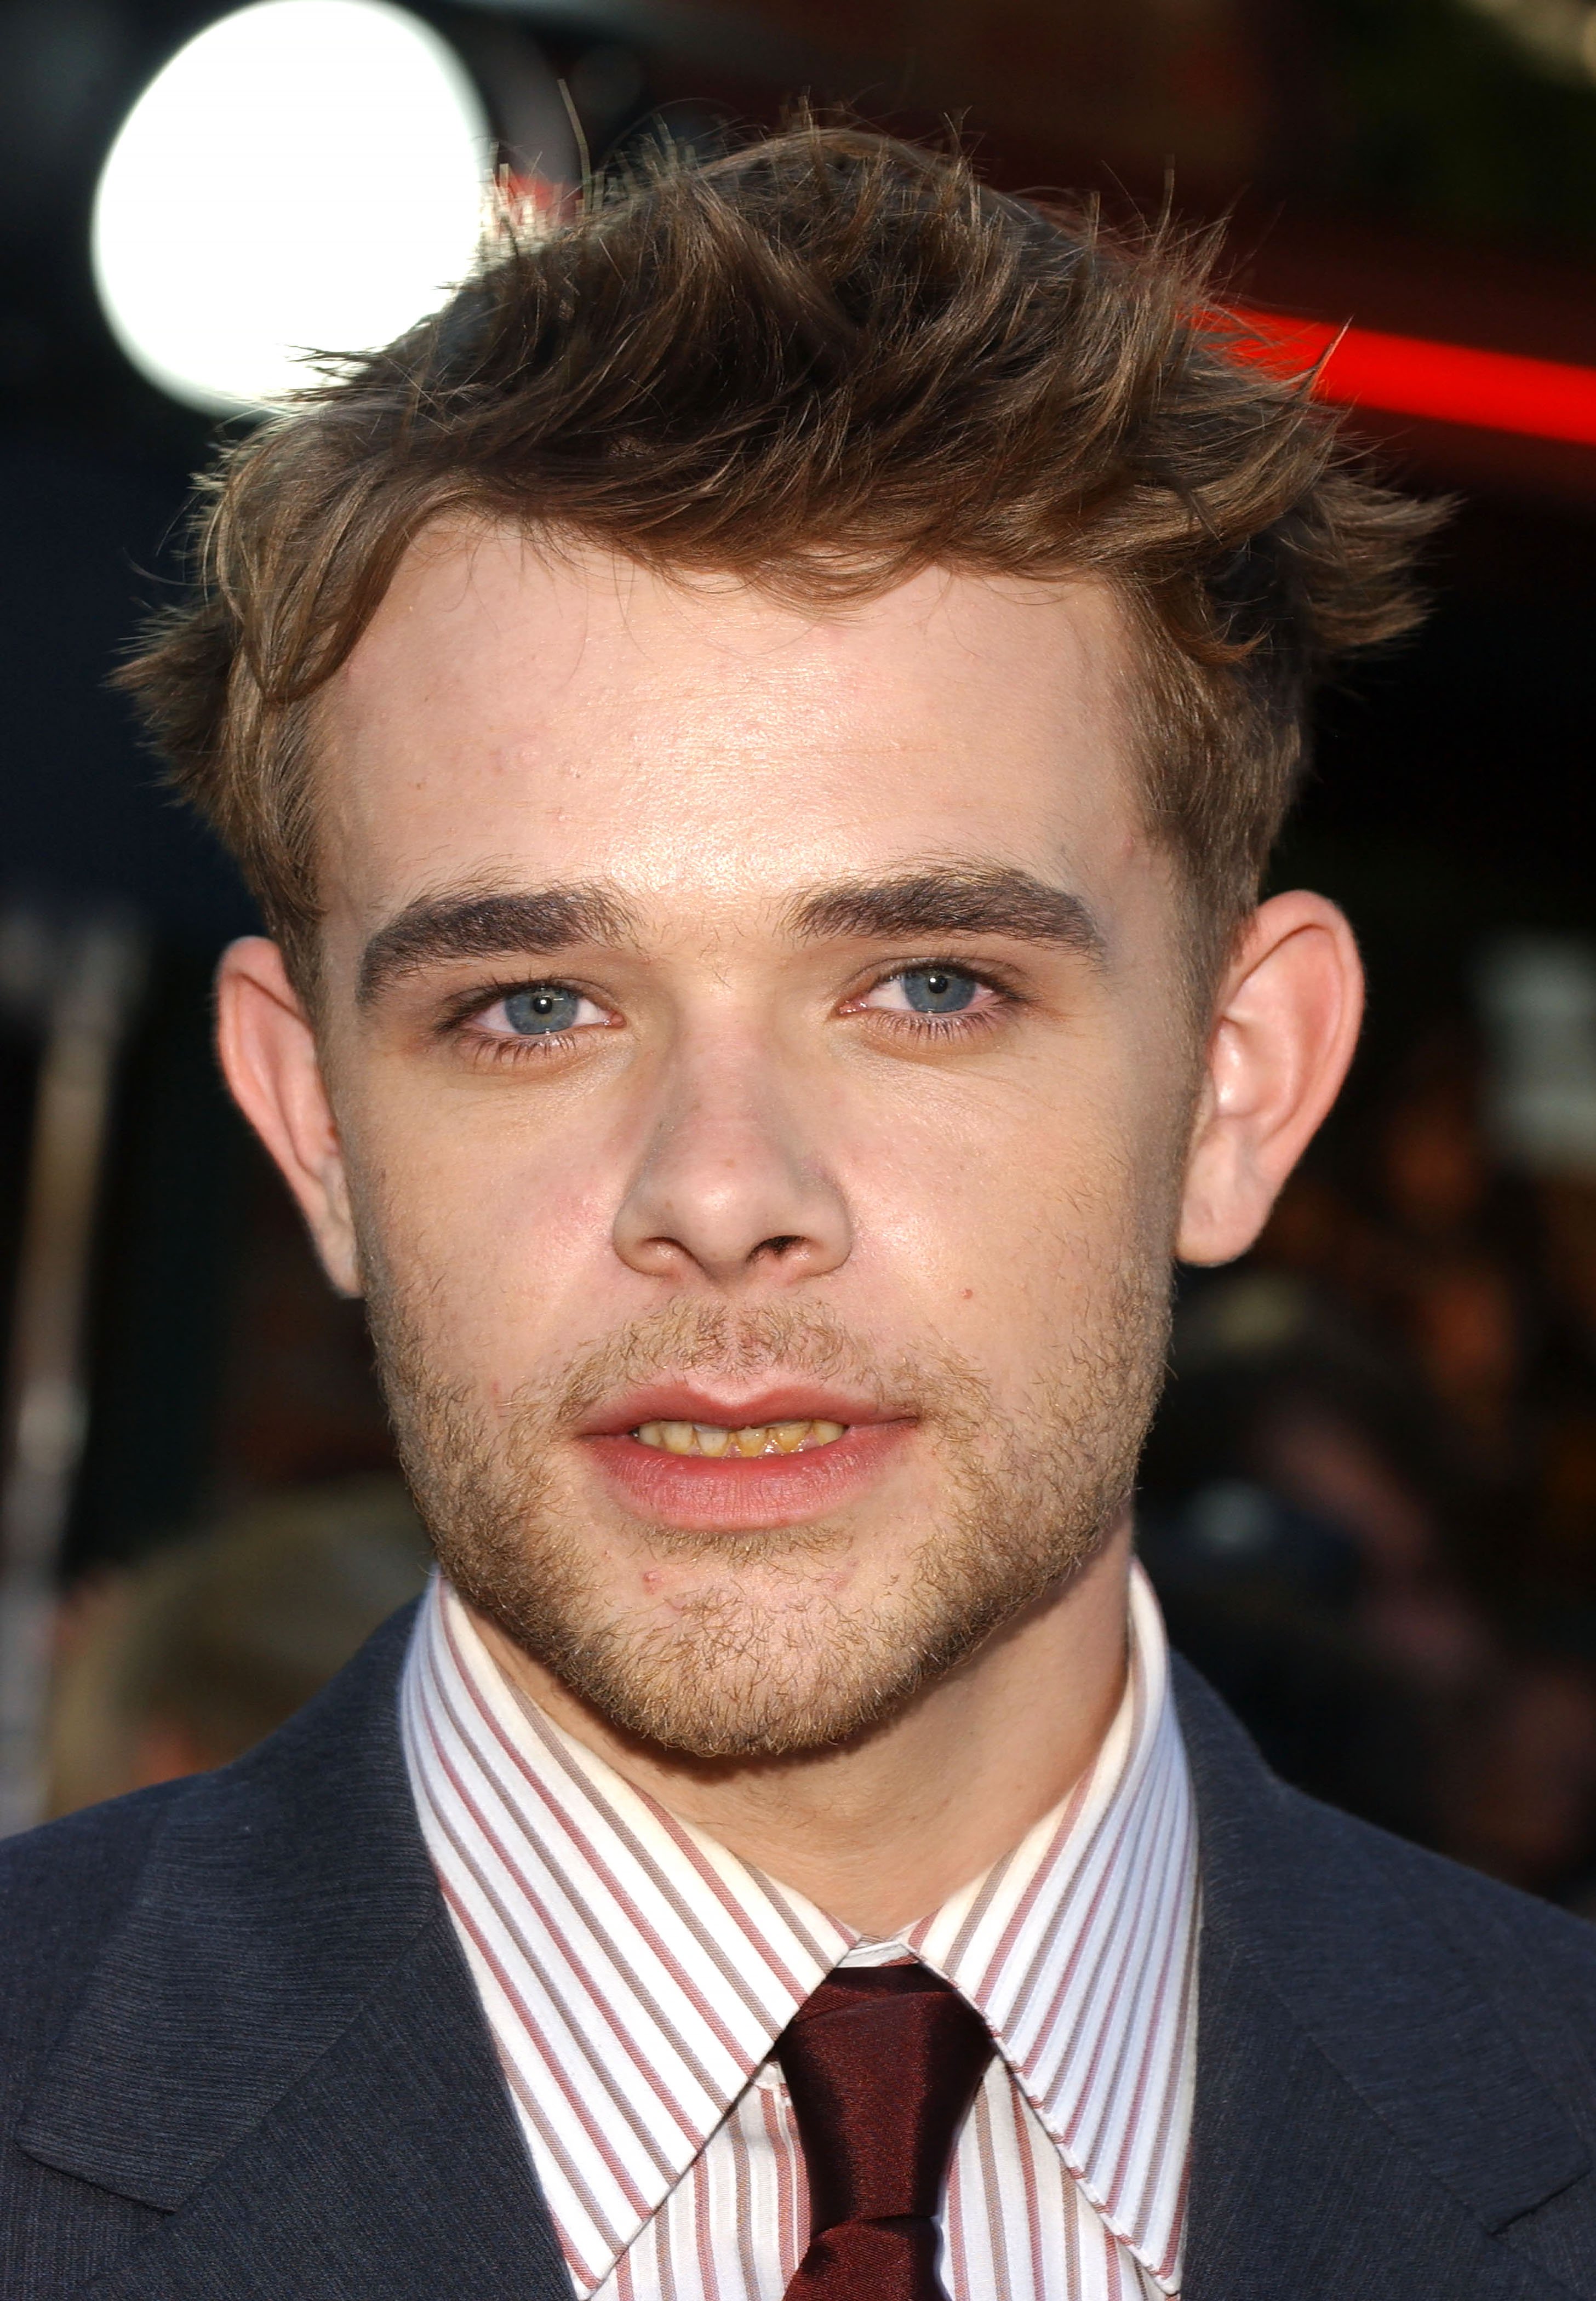 Nick Stahl arrives for the 'Terminator 3: Rise Of The Machines' World Premiere on June 30, 2003 in Westwood, California | Photo: Shutterstock